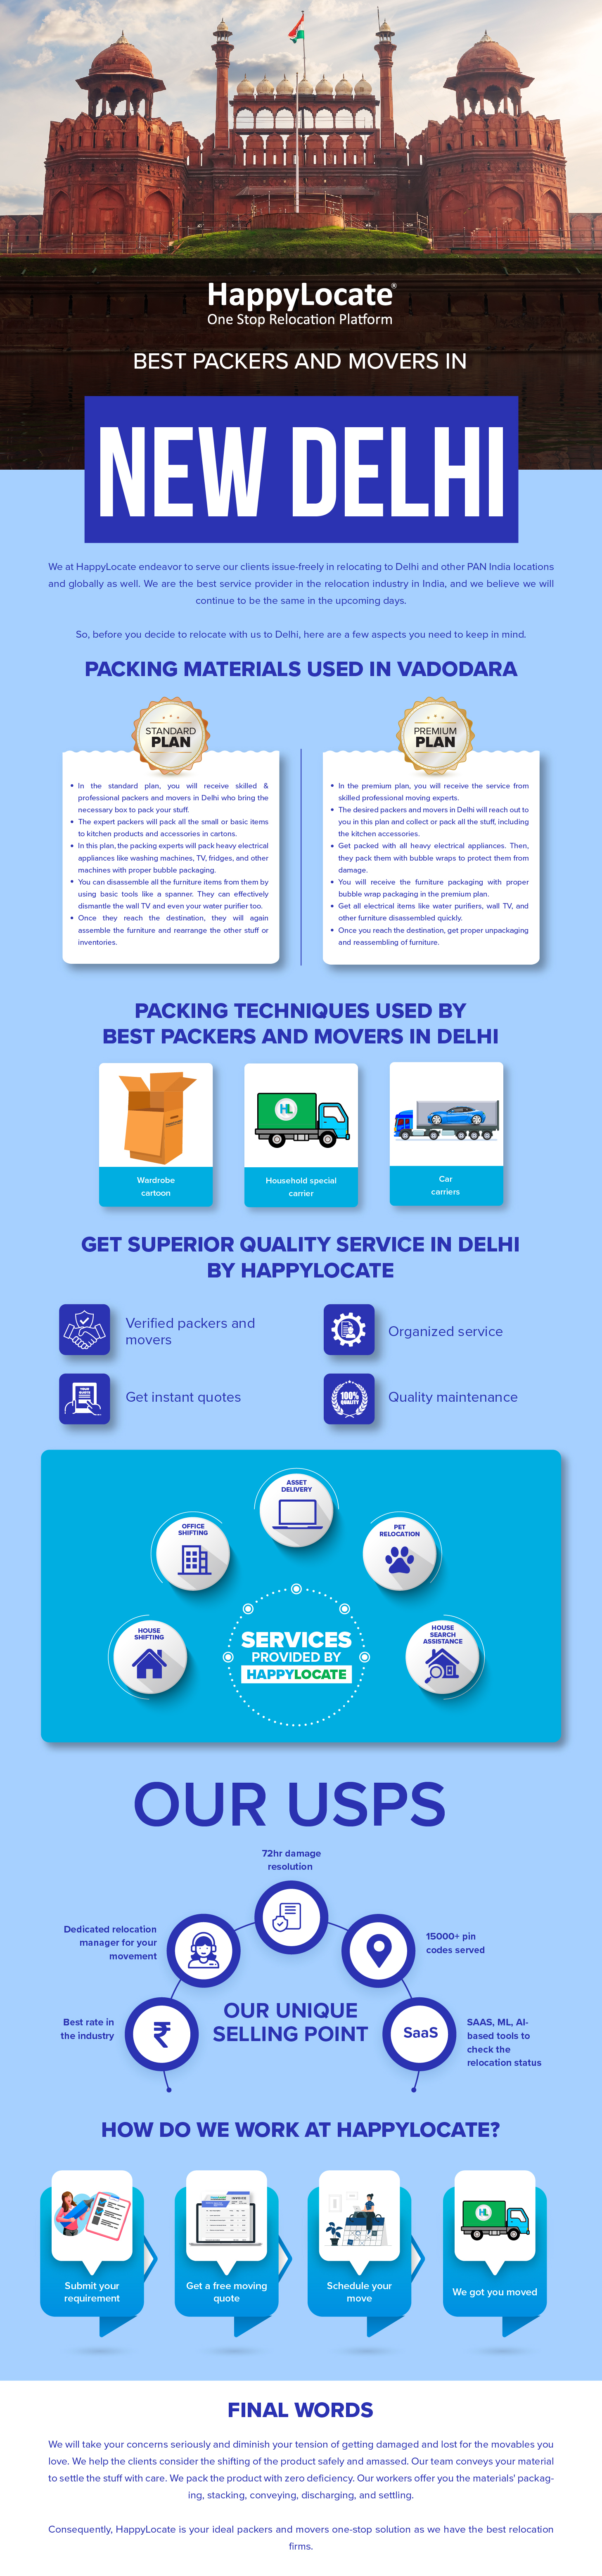 HappylLocate

One Stop Relocation Platform

BEST PACKERS AND MOVERS IN

NEW DELHI

We at HappylLocate endeavor to serve our clients issue-freely in relocating to Delhi and other PAN India locations

 

and globally as well. We are the best service provider in the relocation industry in India, and we believe we will

continue to be the same in the upcoming days.

So, before you decide to relocate with us to Delhi, here are a few aspects you need to keep in mind.

PACKING MATERIALS USED IN VADODARA

4 ni} PREMIUM \
Uo PLAN
) \

ein the standard plan, you wall receive skilled & In the premium plan, you will recerve the service from

onal packers and movers in Delhi who bring the skilled professional moving experts

 

y box to pack your stuff The desired packers and movers in Delhi will reach out to

   

« The expert packers will pack all the small or basic items you in this plan and collect or pack all the stuff, including

 

to kitchen products and a the kitchen accessories

In this plan, the packing experts

Get packed with all heavy electncal appliances Then,

 
 

ck heavy electrical

    
  
    

appliances like washing machines, TV, fndges, and other they pack them with bubble wraps to protect them from
mac 1th proper bubble packaging damage

* You emble all the furniture items from them by © You will receve the furniture packaging with proper
using basic tools like a spanner They can effectively bubble wrap packaging in the premium plan
dismantle the wall TV and even your water purifier too. * Get all electrical like water purifiers, wall TV, and

   

« Or they reach the destination, they will again other furniture d

 

bled quickly

  
 

  

smble the furniture and rearrange the other stuff or * Once you reach the destination, get proper unpackaging

inventones and reassembling of furniture

 

  

PACKING TECHNIQUES USED BY
BEST PACKERS AND MOVERS IN DELHI

-

=
Wardrobe Household special
cartoon carrier

 

GET SUPERIOR QUALITY SERVICE IN DELHI
BY HAPPYLOCATE

Verified packers and 0) nee
movers

iE Get instant quotes

(=) Quality maintenance

  

ASSET
DELIVERY

‘ SERVICES
J PROVIDED BY ®

 

OUR US

72hr damage
resolution

  
   
 
  
 

Dedicated relocation
manager for your
movement

15000+ pin
codes served

  

OUR UNIQUE

  

Best rate in SAAS, ML, Al-
the industry SELLING POINT based tools to
check the

relocation status

HOW DO WE WORK AT HAPPYLOCATE?

RIV TRV] Get a free moving Schedule your

(CIE EGTS Te pitsnin We got you moved

  

FINAL WORDS

We will take your concerns seriously and diminish your tension of getting damaged and lost for the movables you
love. We help the clients consider the shifting of the product safely and amassed. Our team conveys your material
to settle the stuff with care. We pack the product with zero deficiency. Our workers offer you the materials’ packag-

ing, stacking, conveying, discharging, and settling

Consequently, HappyLocate is your ideal packers and movers one-stop solution as we have the best relocation

firms